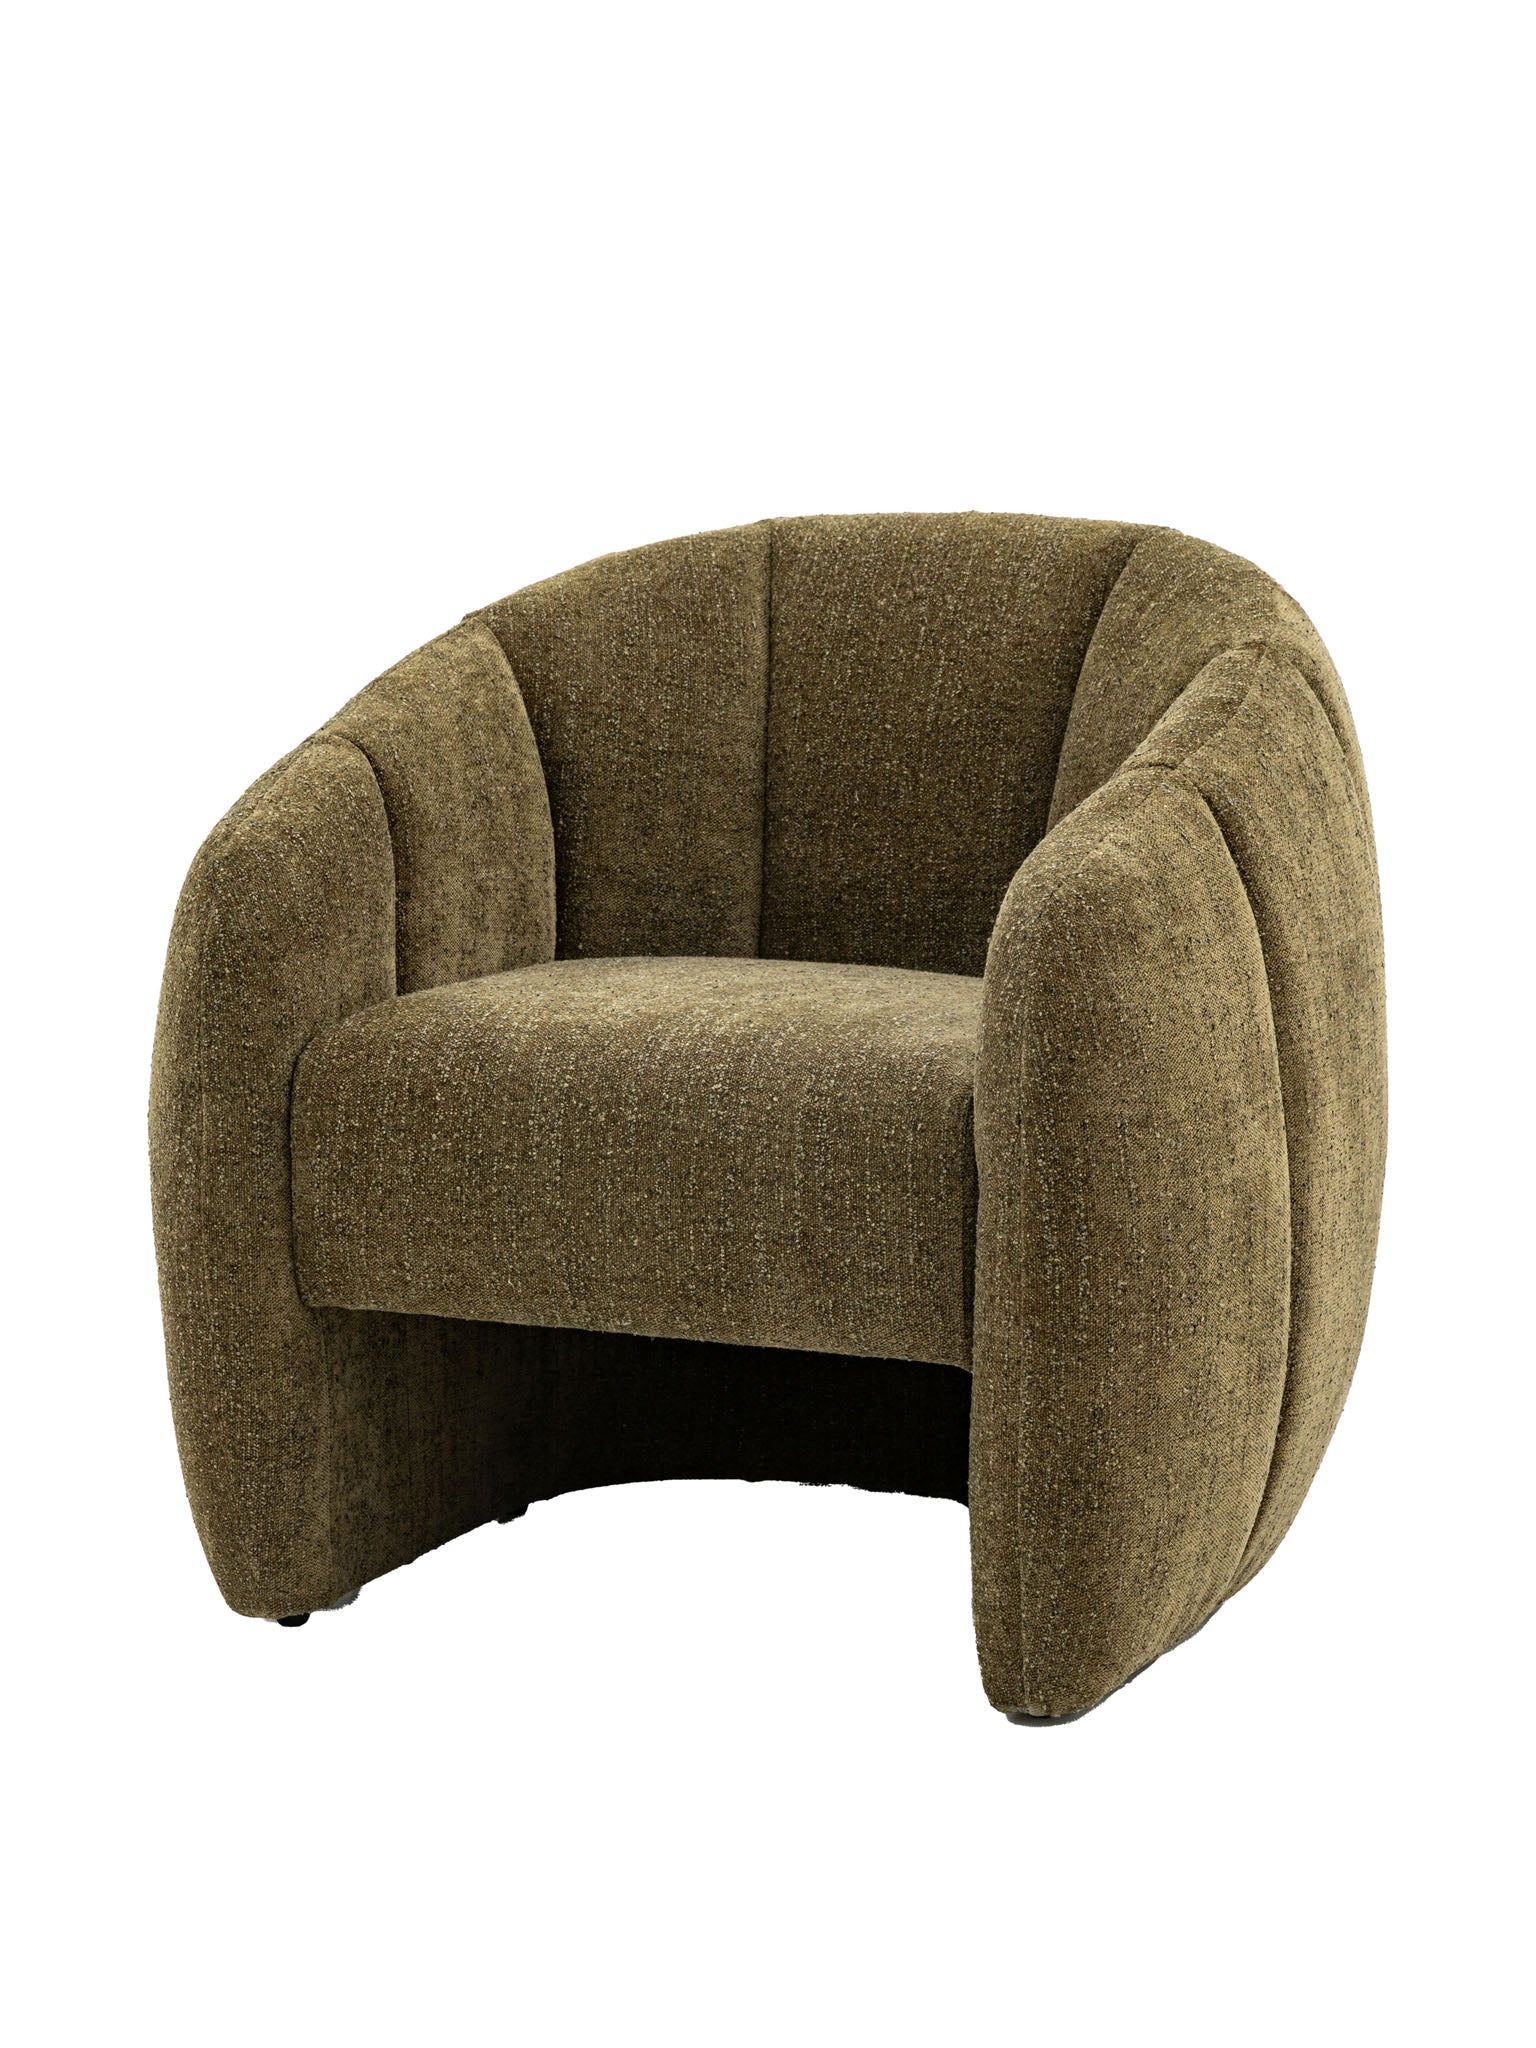 Moss green tub chair with curved sides